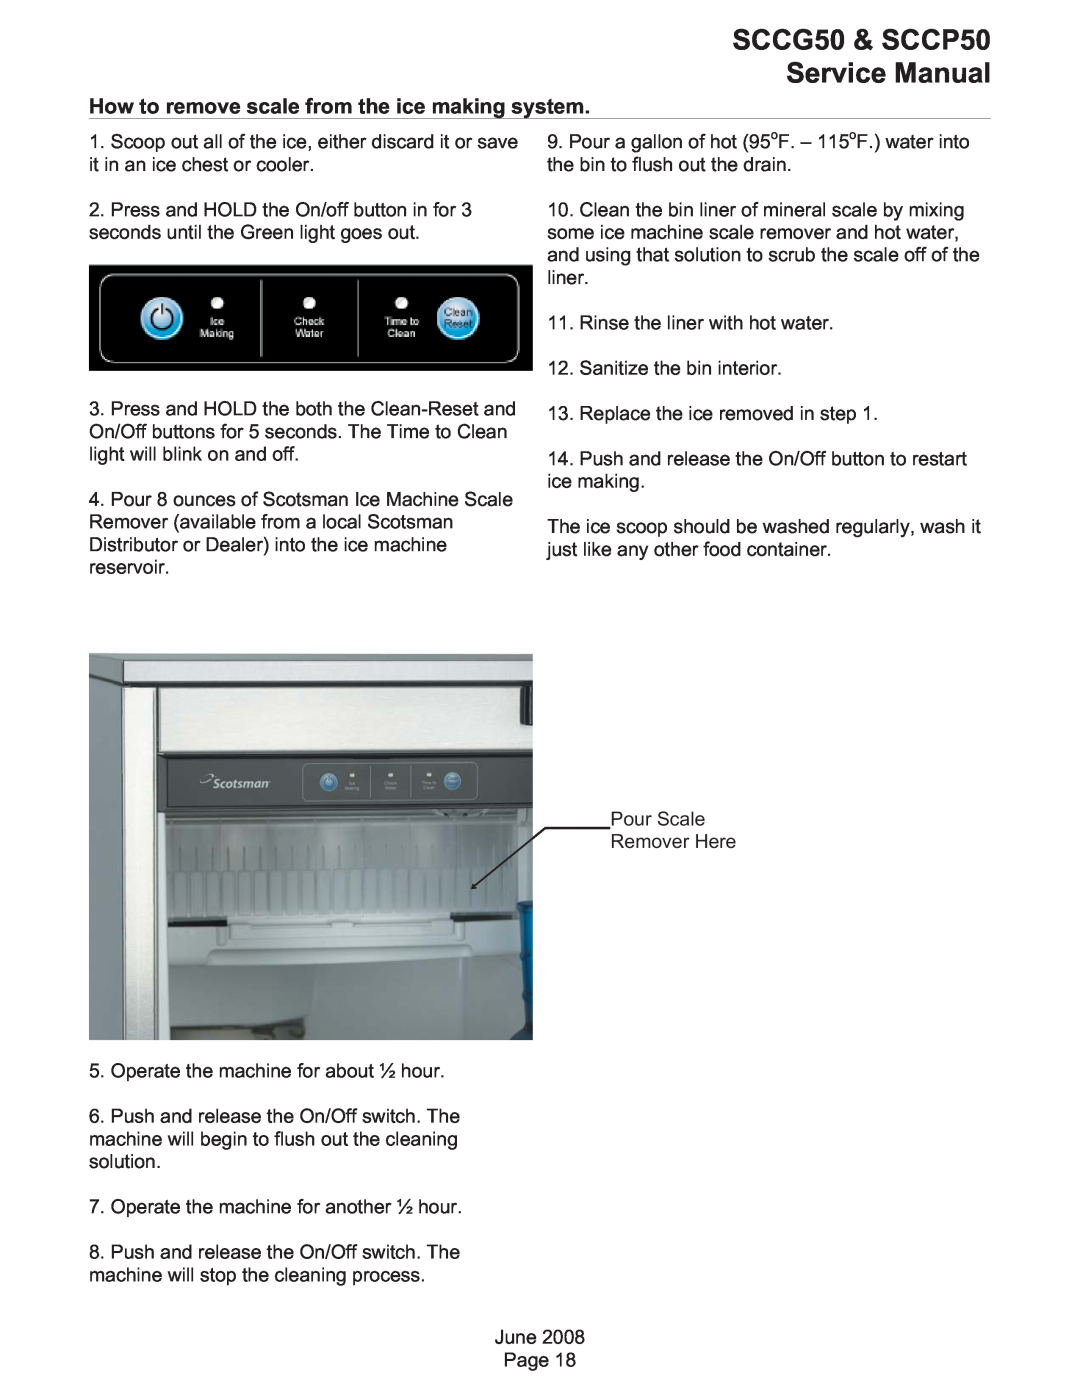 Scotsman Ice SCCG50, SCCP50 service manual How to remove scale from the ice making system 